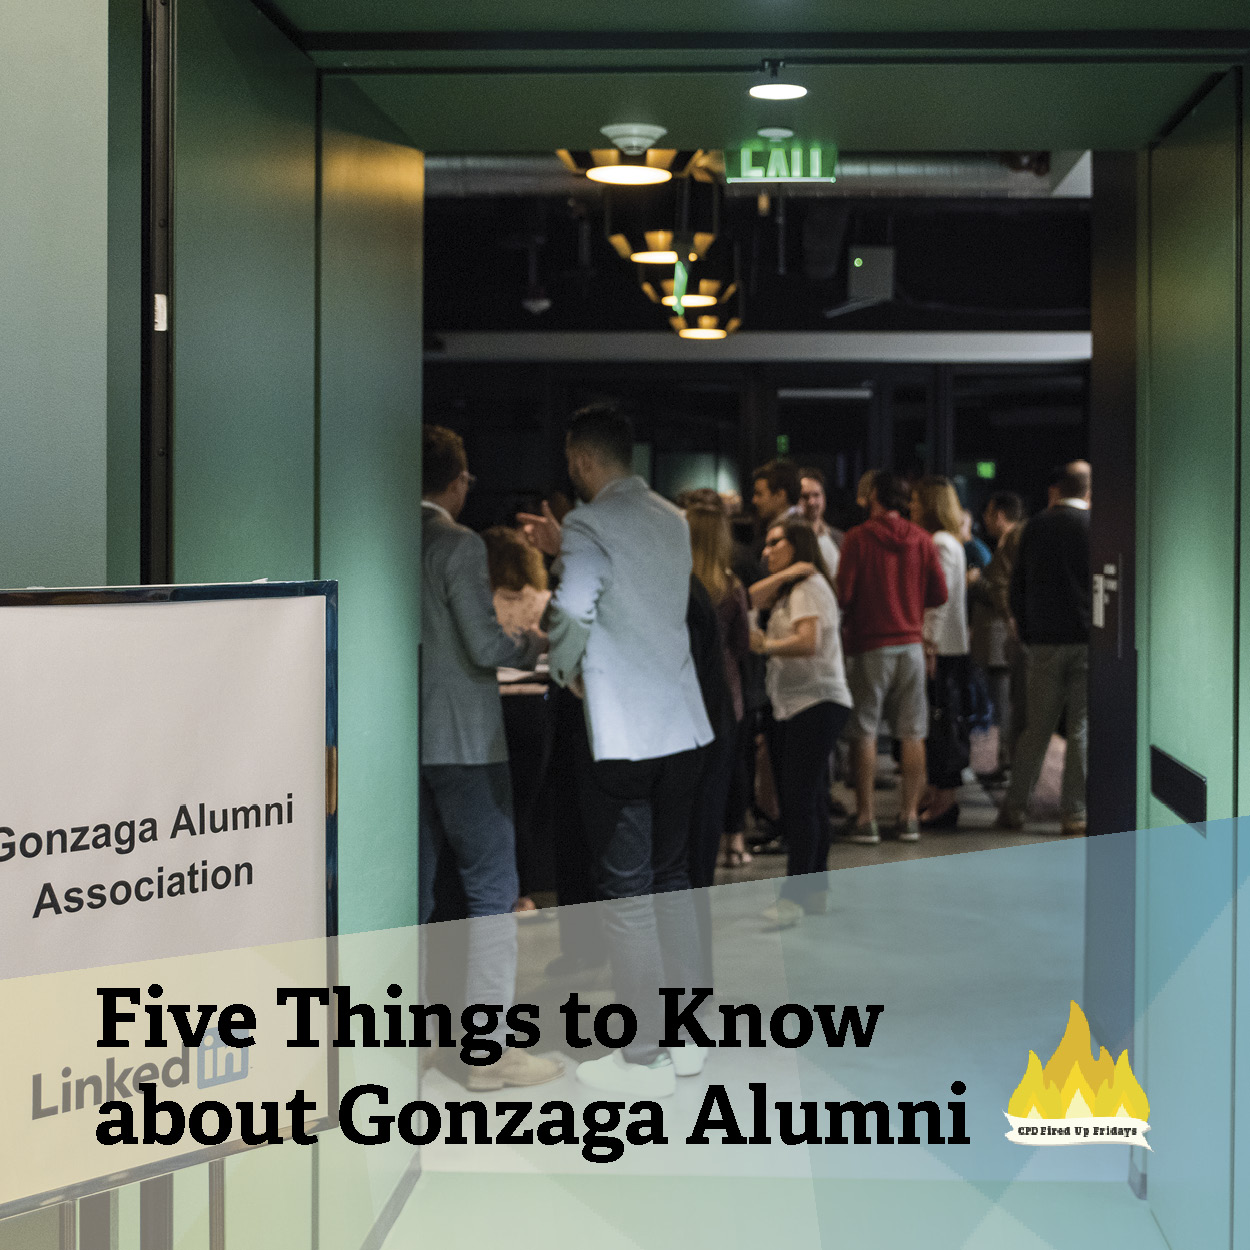 Just outside of a pair of open doors, a white stand sign reads ''Gonzaga Alumni Association.' Visible through the doors Gonzaga alumni are visible standing together and socializing. Underneath the image, text reads: 'All About the Alumni Association.'